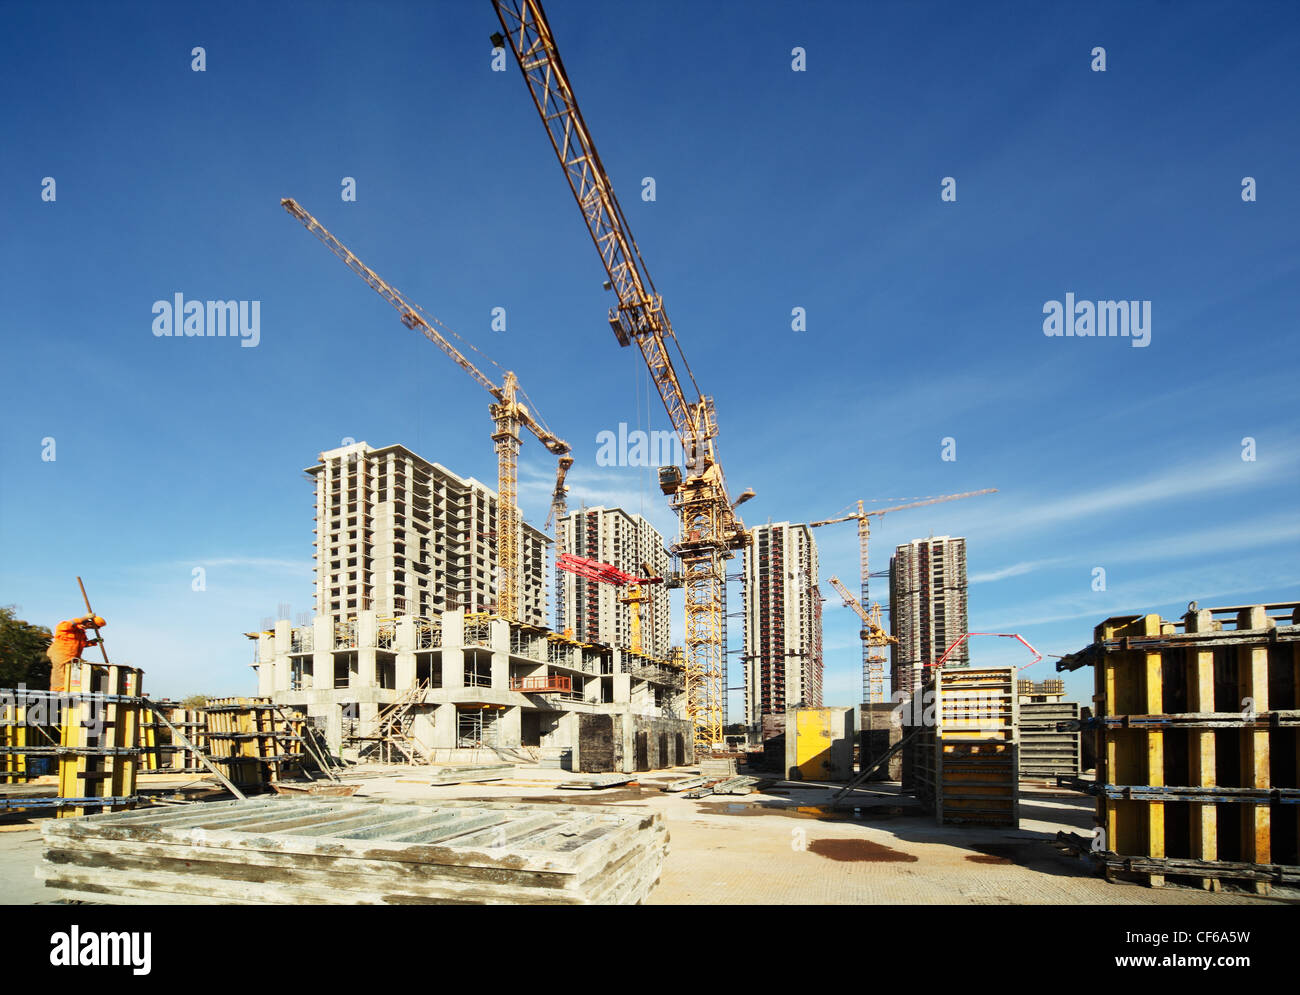 Working tall cranes inside place for with tall buildings under construction under a blue sky Stock Photo